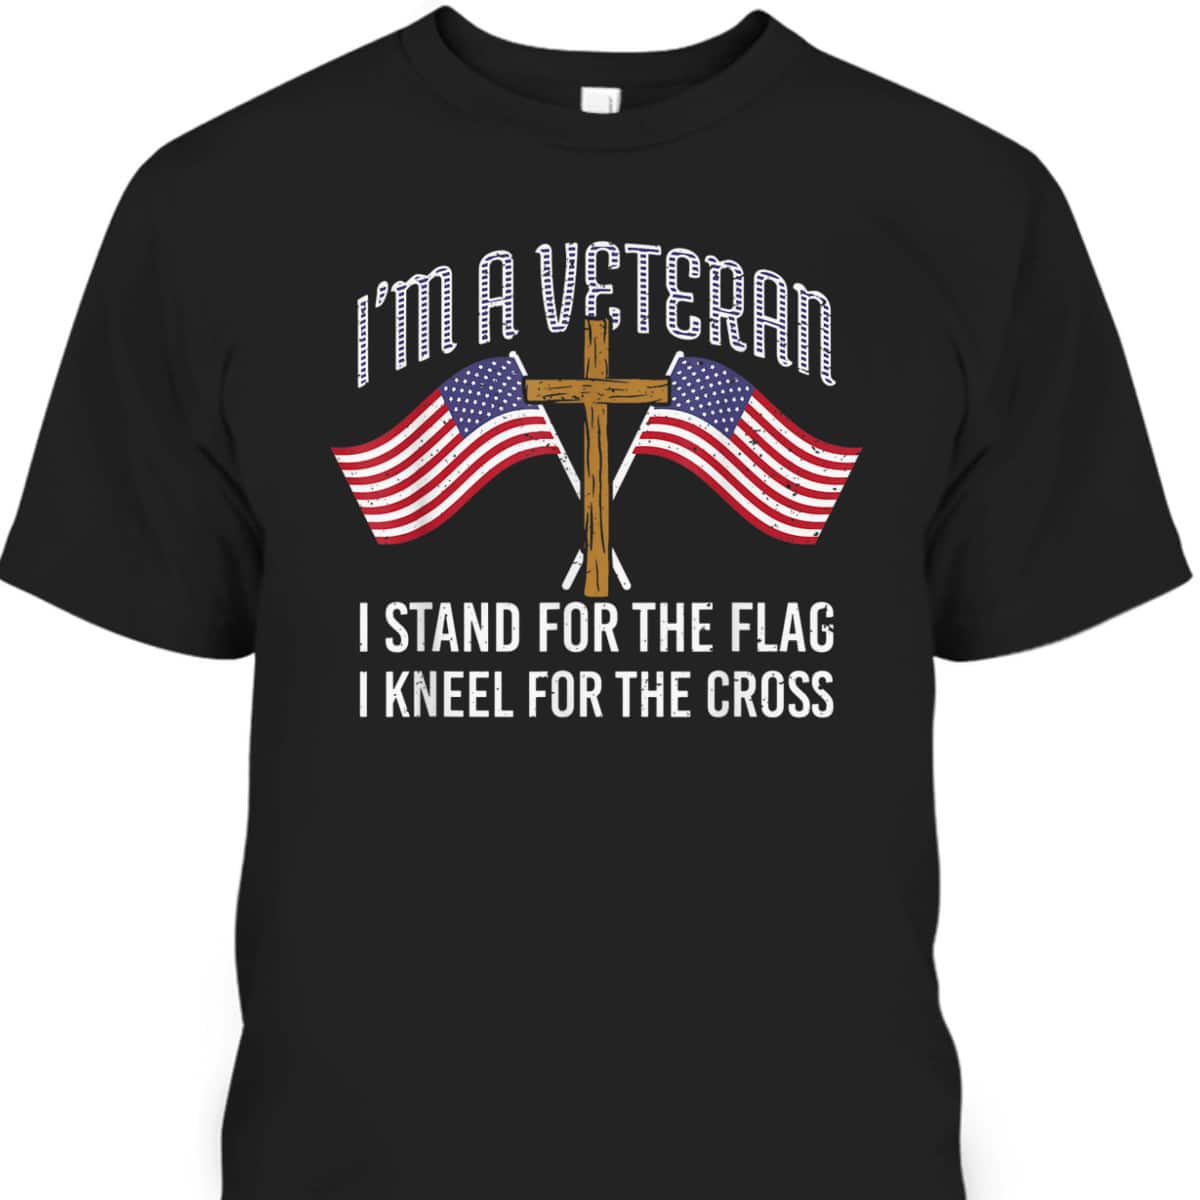 American Patriot T-Shirt I'm A Veteran Stand For The Flag Kneel For The Cross